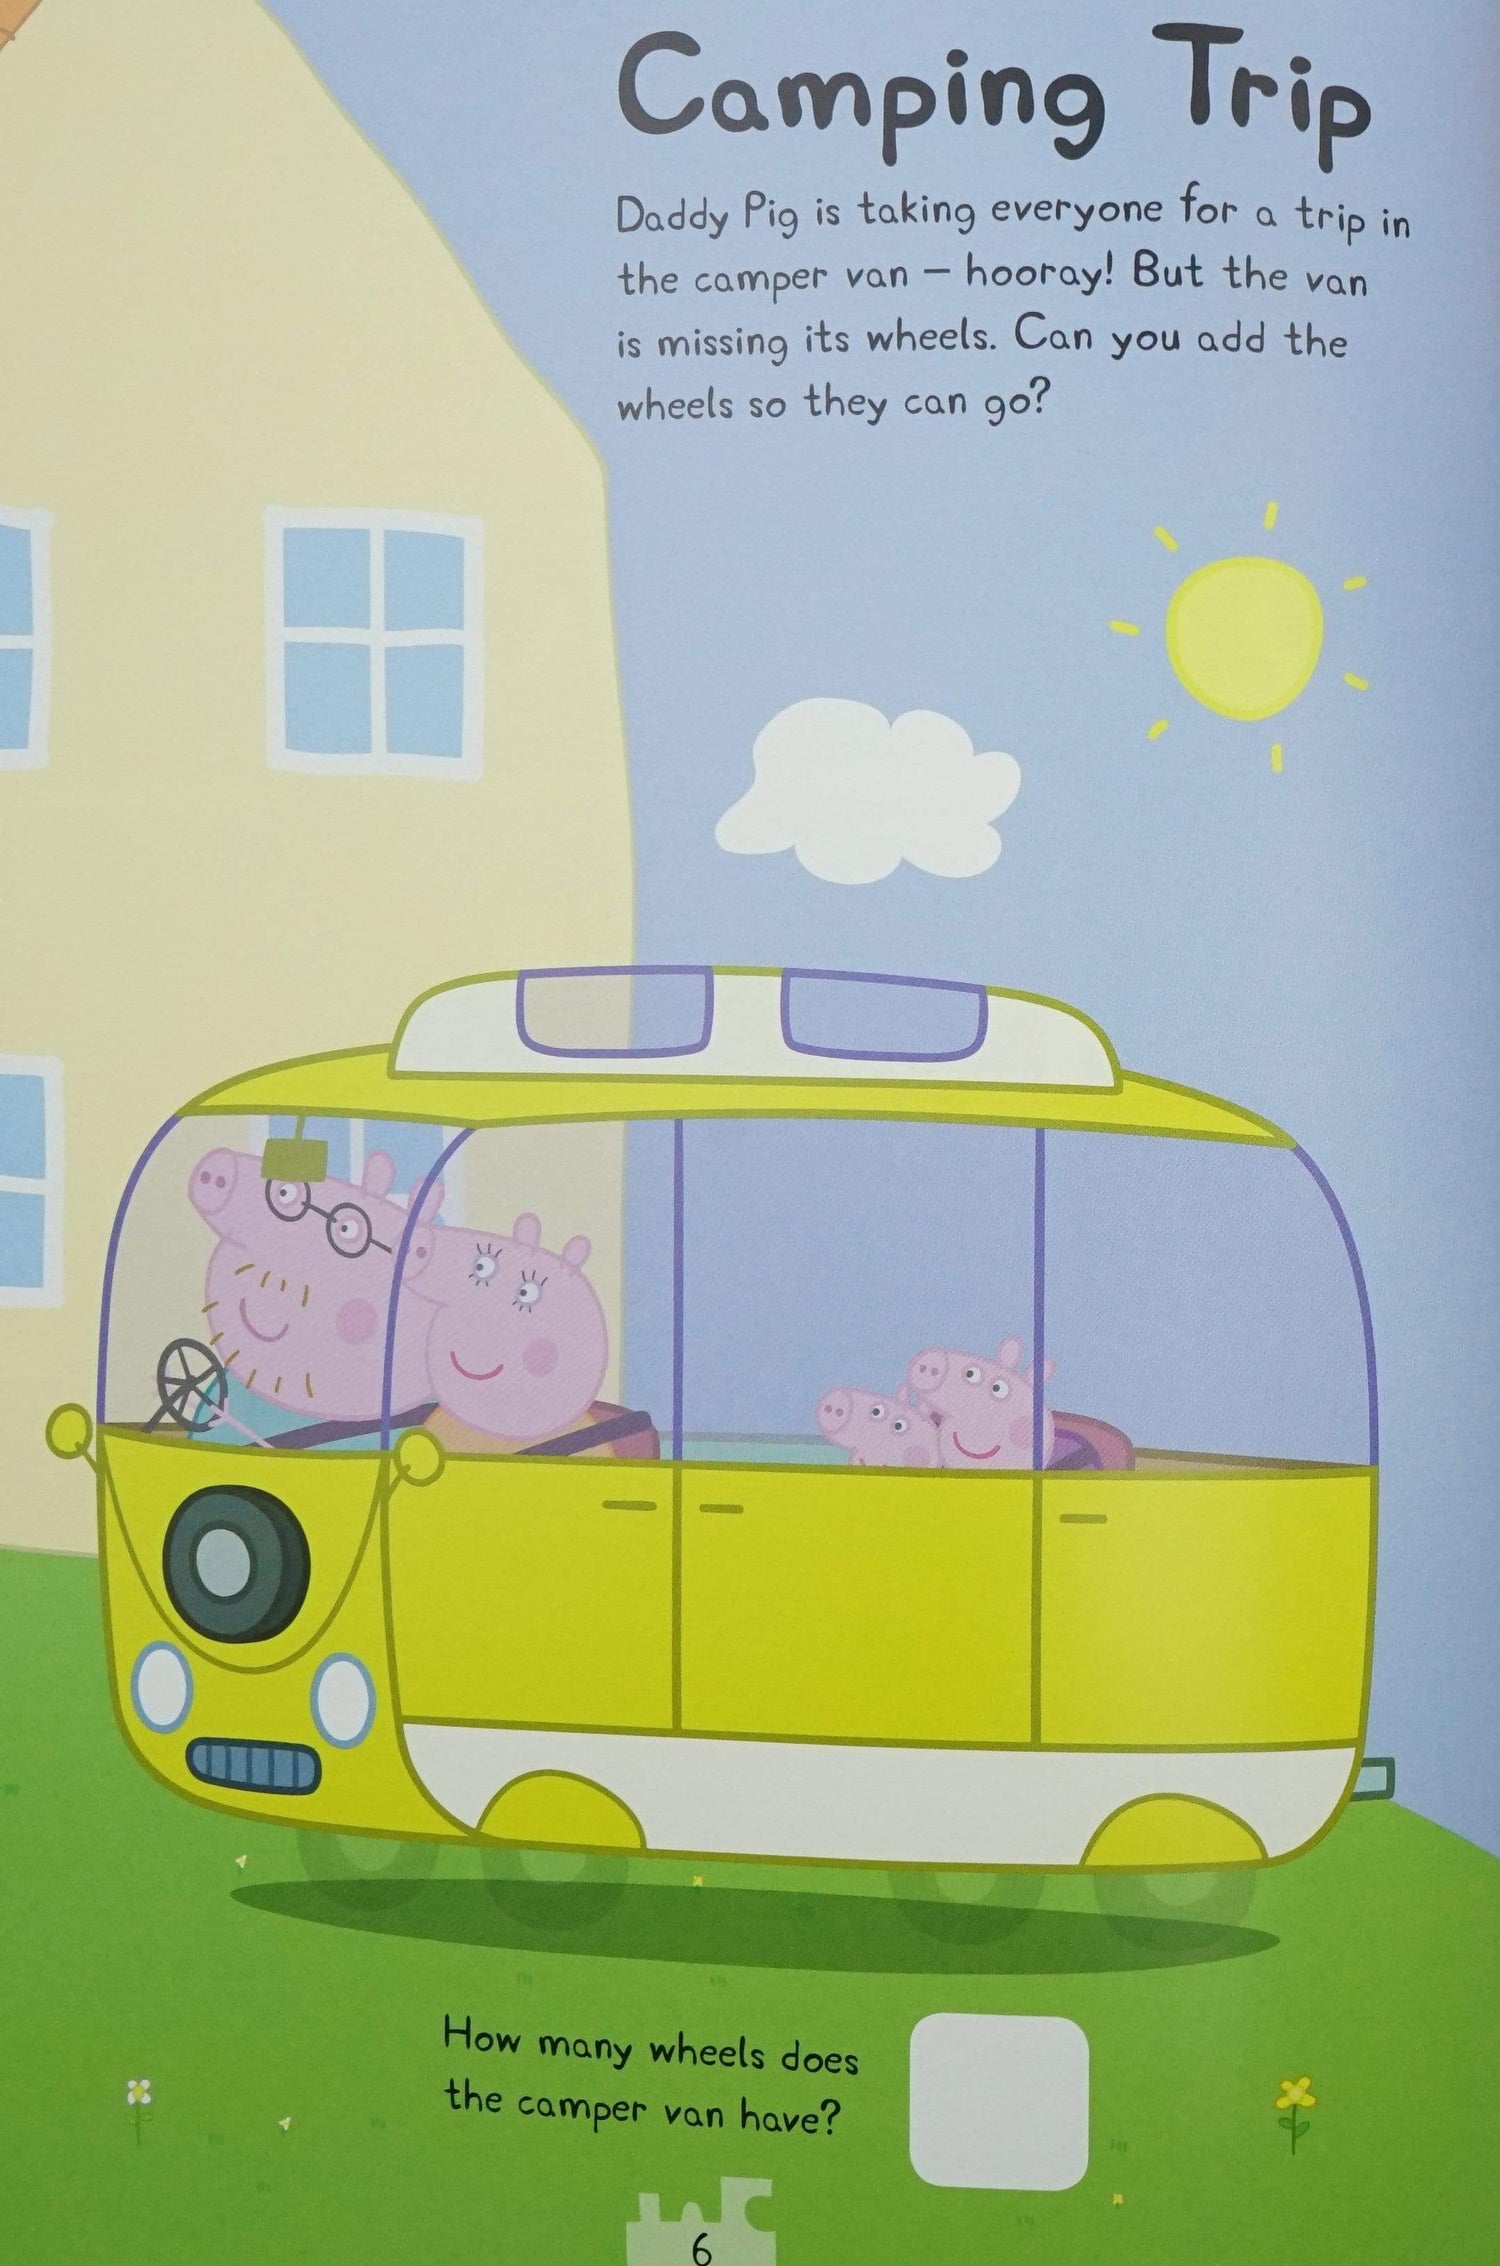 Peppa Pig: On The Move! Sticker Activity Book